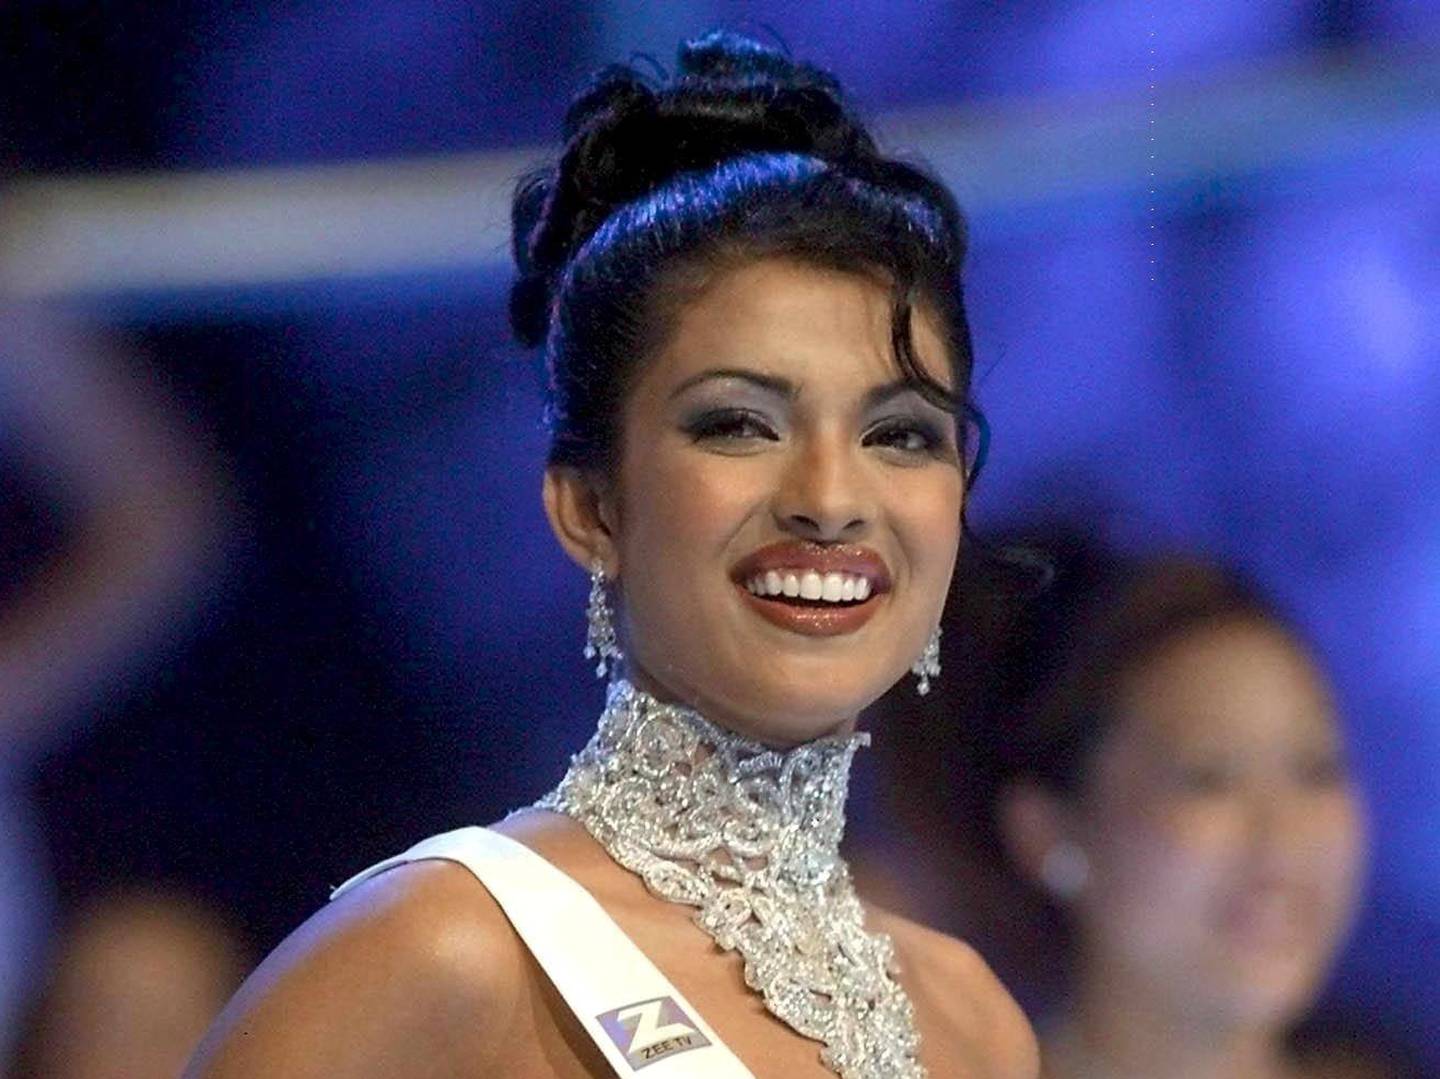 MWD31 - 20001130 - LONDON, UNITED KINGDOM: 18-year-old Priyanka Chopra of India poses on stage during the Miss World final at the Millenium Dome in London, Thursday 30 November 2000. Chopra won the contest. EPA PHOTO EPA/GERRY PENNY